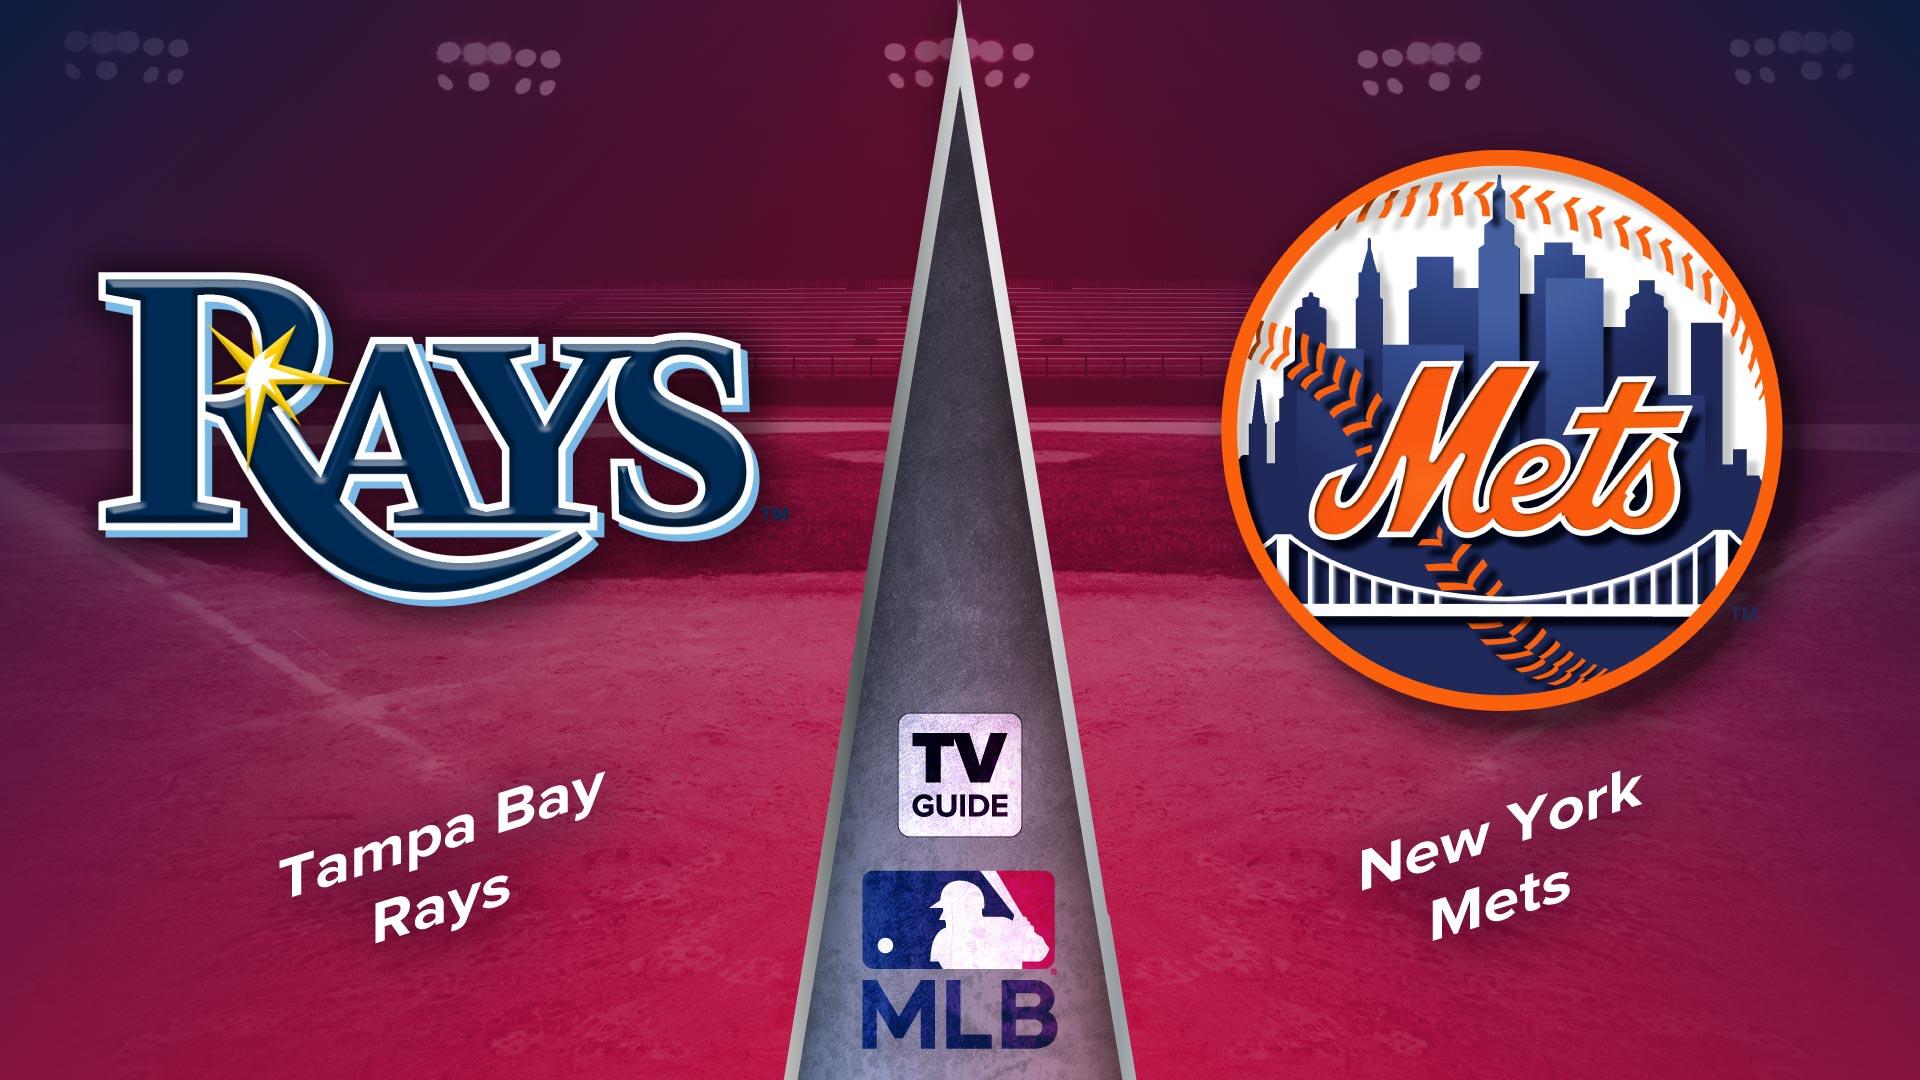 How to Watch Tampa Bay Rays vs. New York Mets Live on May 16 TV Guide